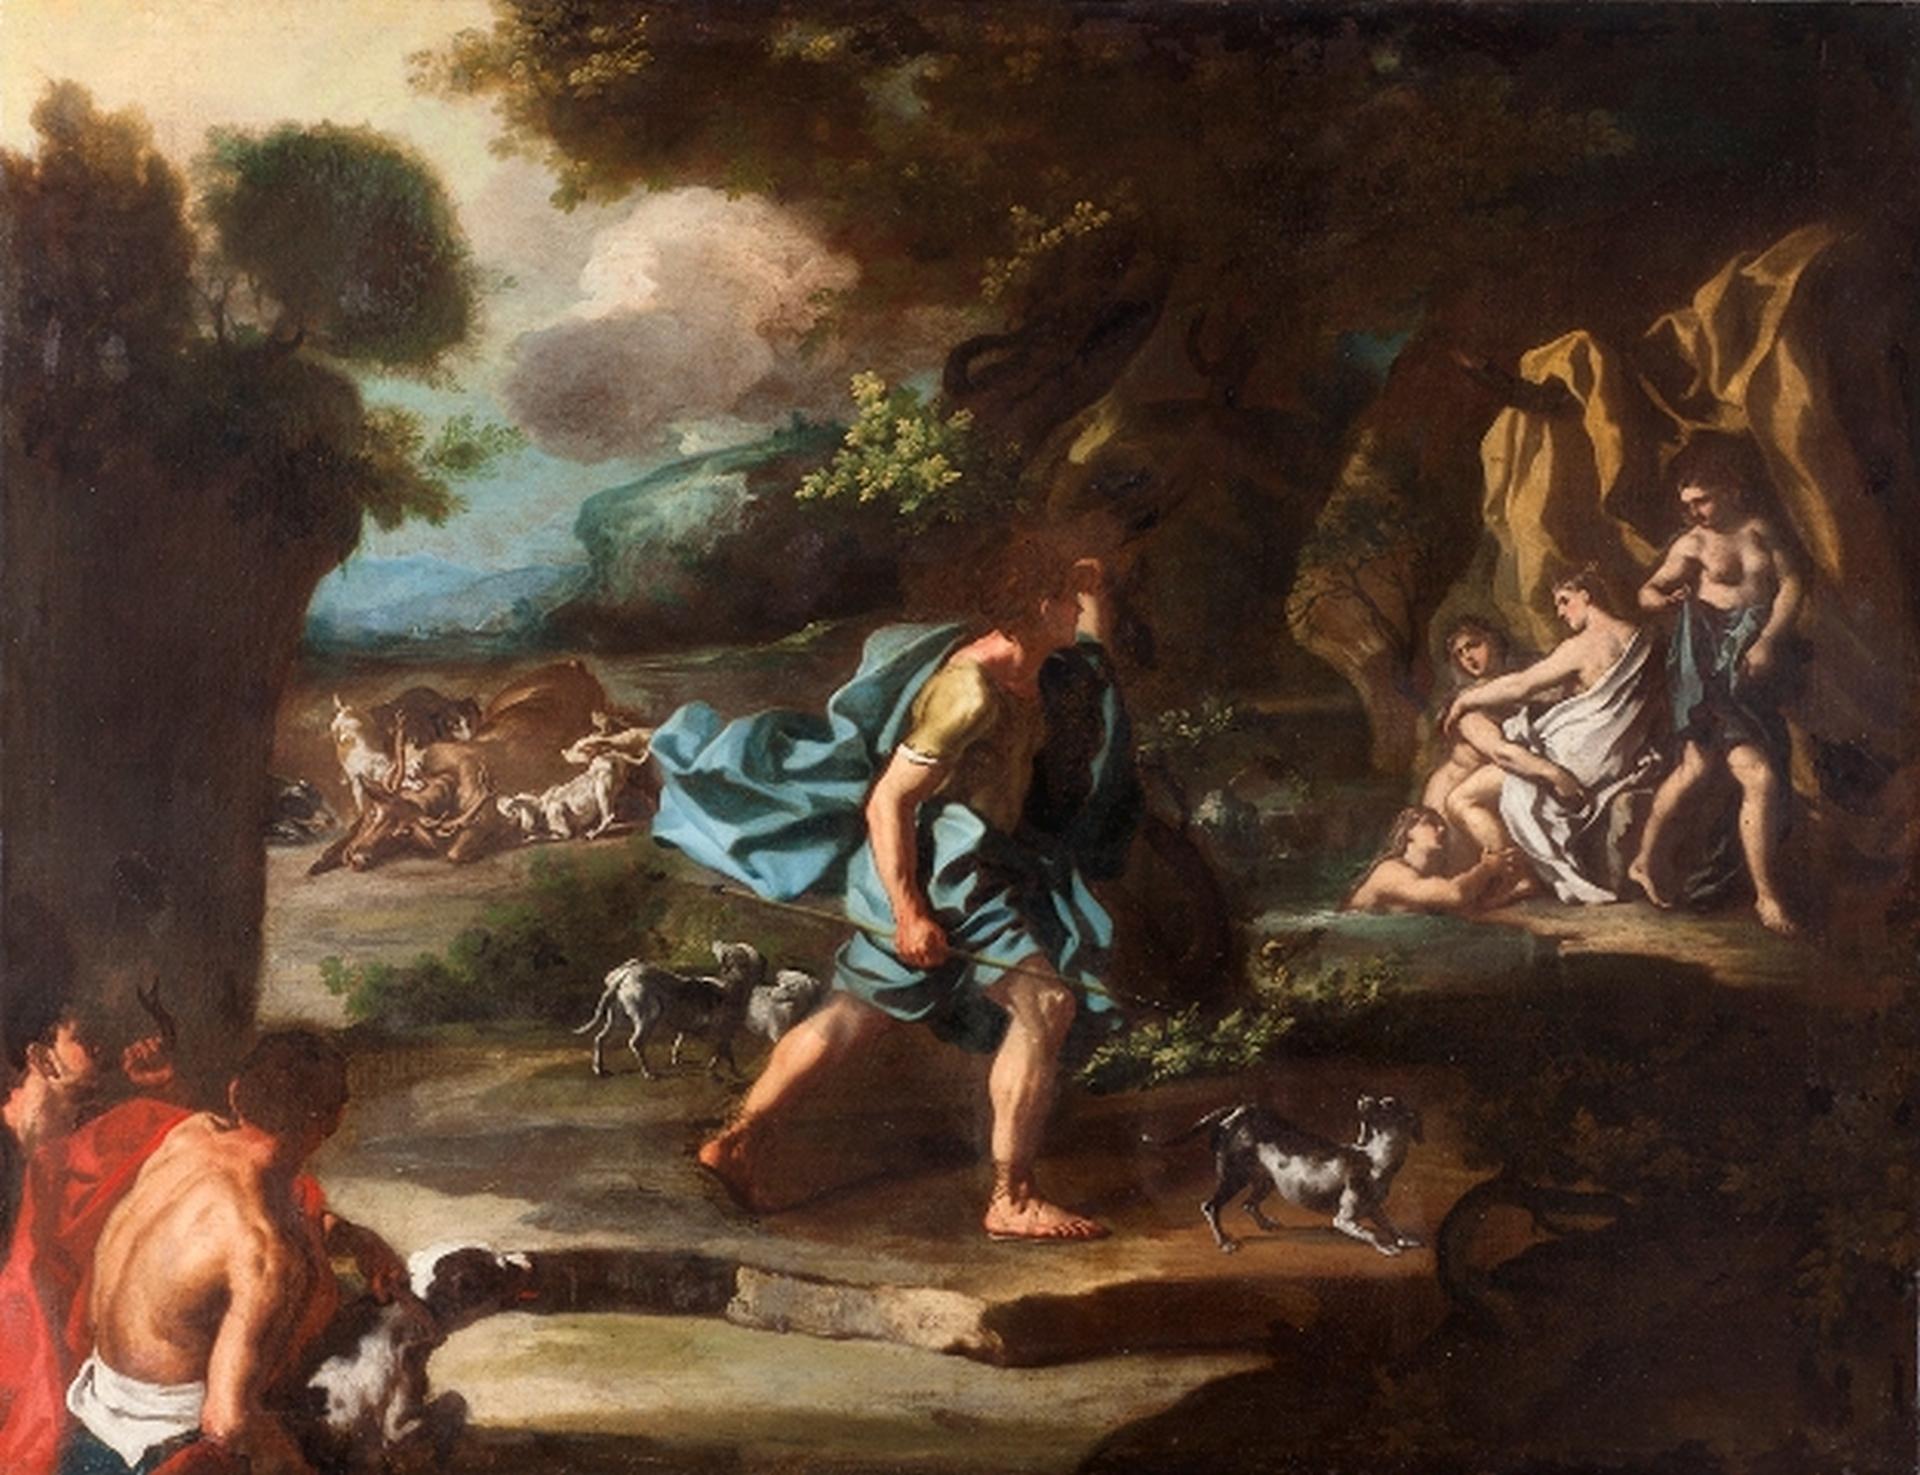 Painting oil on canvas depicting the myth of Diana and Actaeon measuring 110 x 130 without frame and 120 x 140 with frame by the painter Francesco Solimena.

According to the myth, during a hunting trip, Actaeon provoked Diana's wrath when he caught